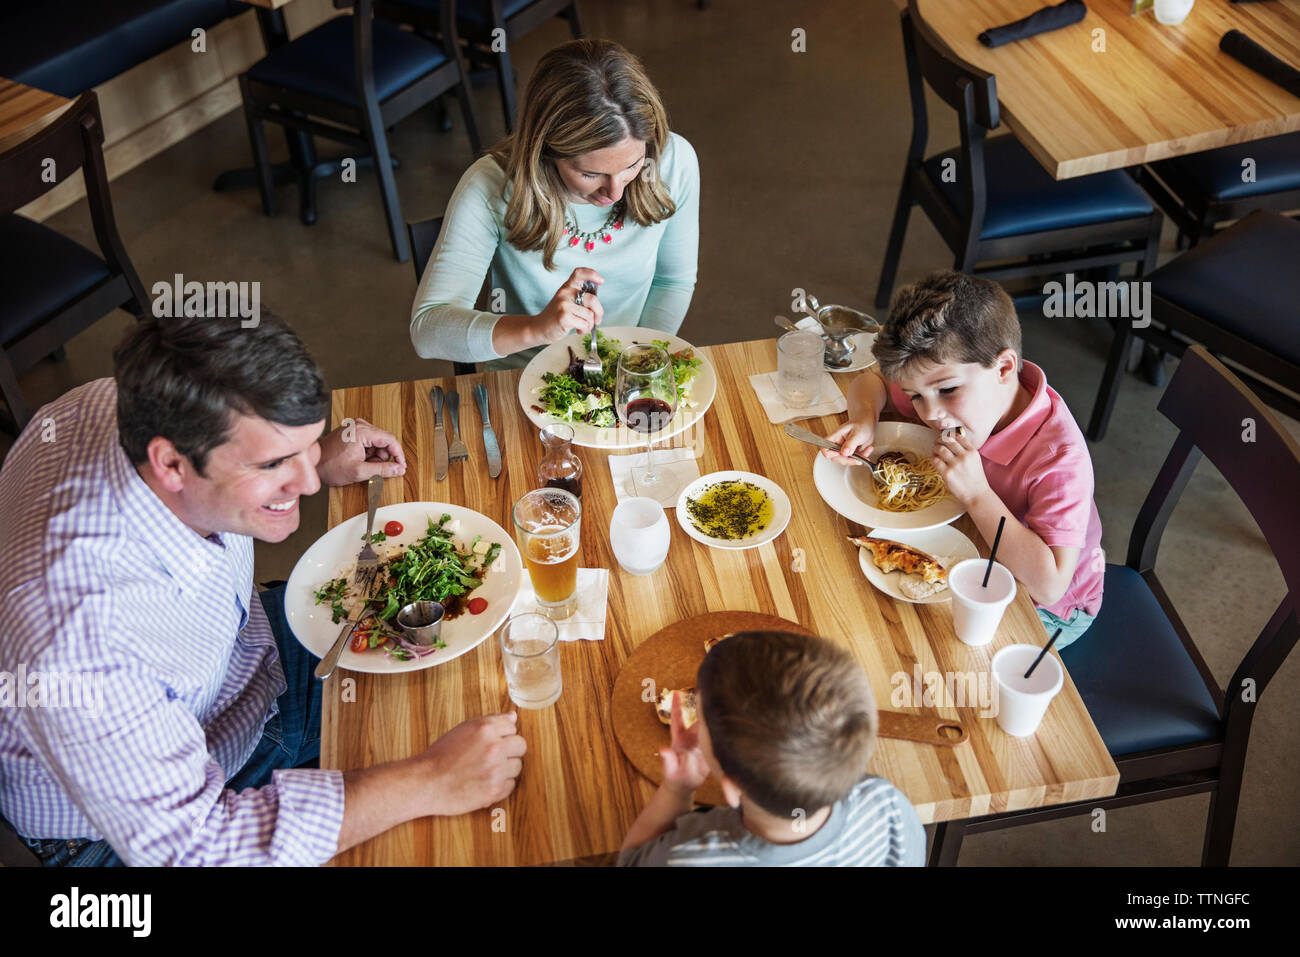 Overhead view of family eating food in restaurant Stock Photo